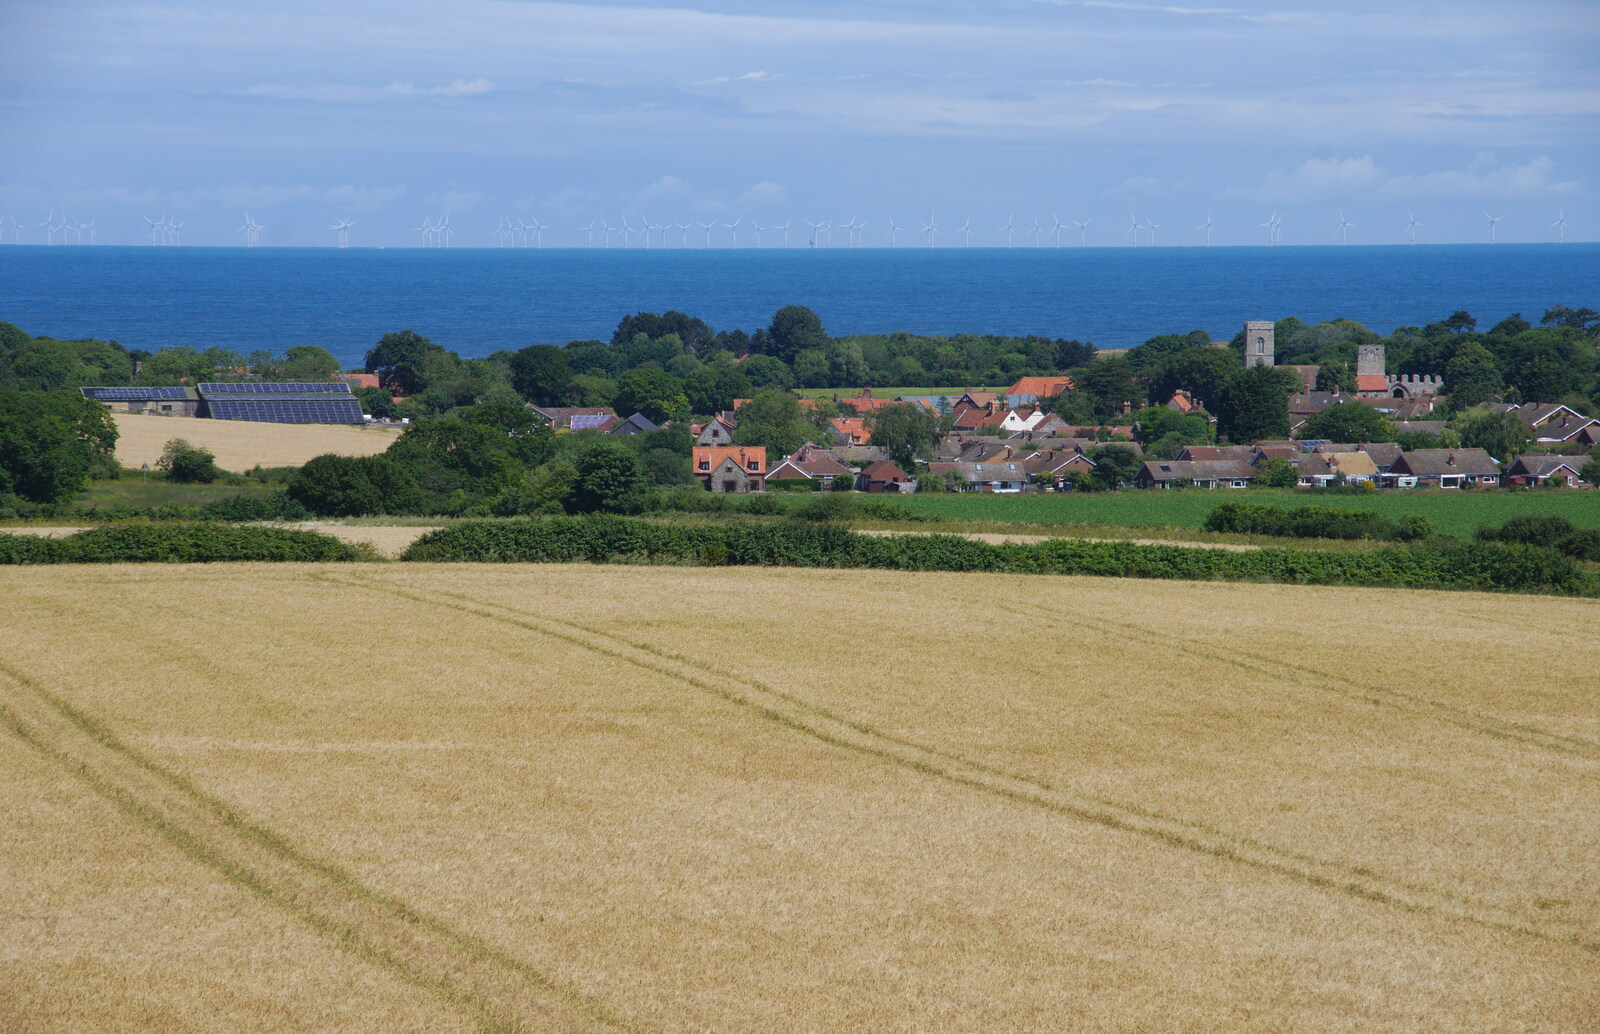 The view of the wind turbines out to sea from Kelling Camping and the Potty Morris Festival, Sheringham, North Norfolk - 6th July 2019